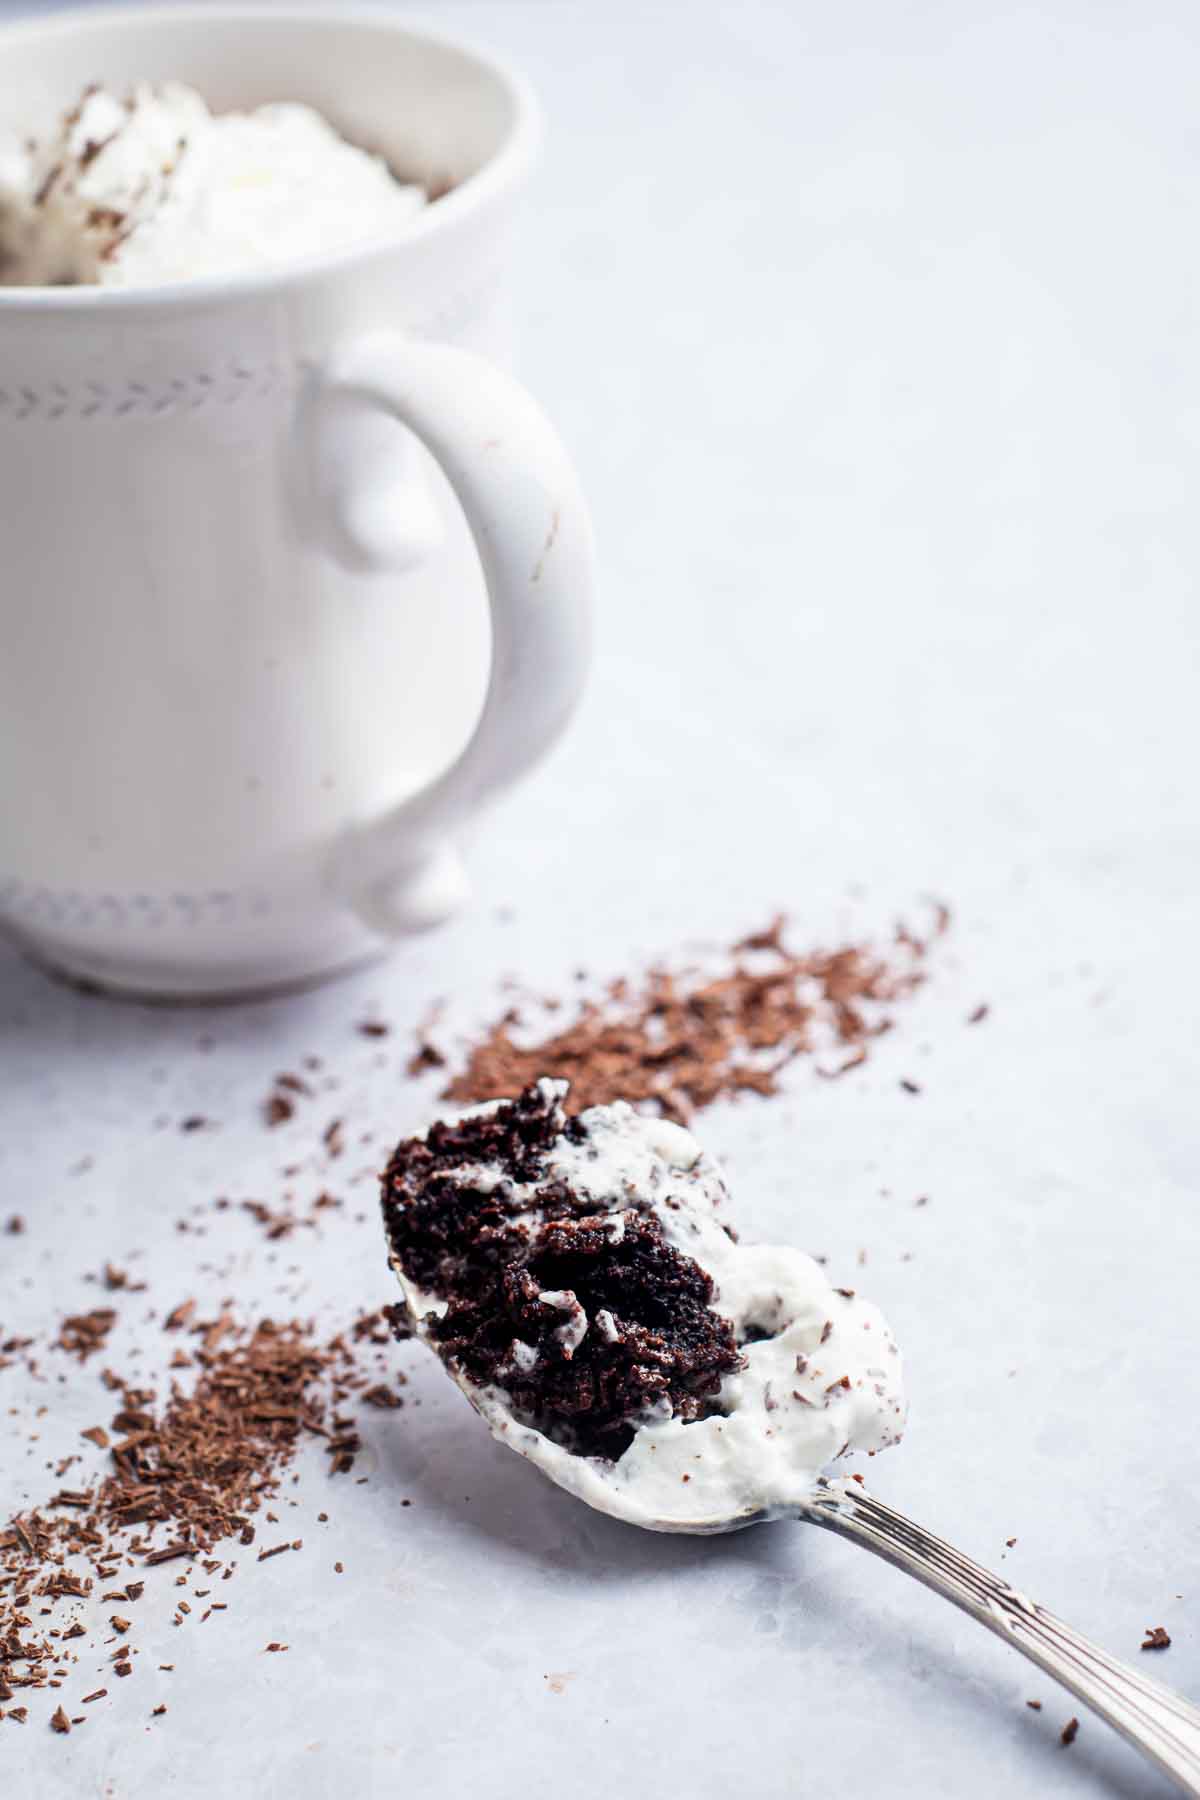 A spoonful of mocha mug cake and whipped cream, ready to be eaten!